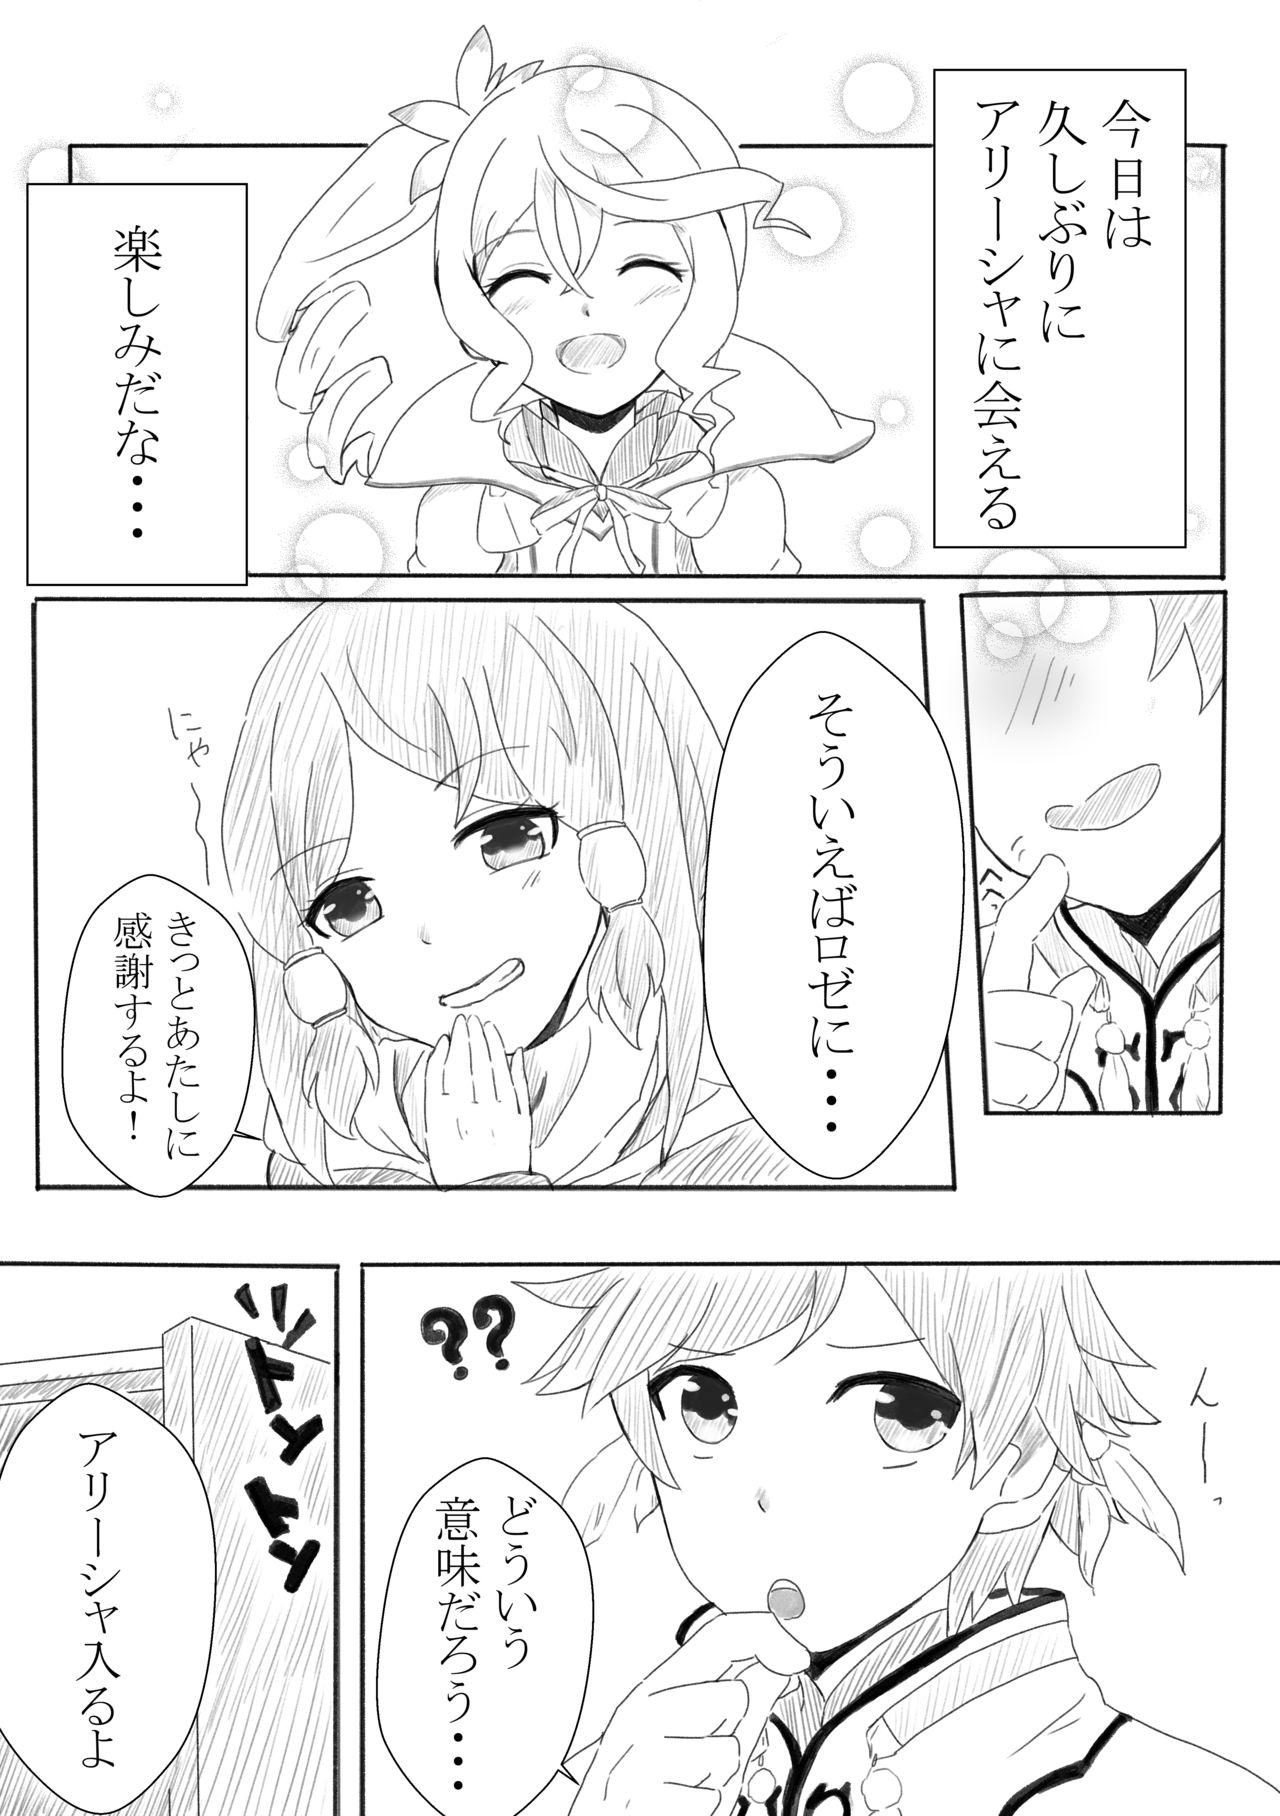 Moaning アリーシャで癒して？ - Tales of zestiria Animated - Page 2